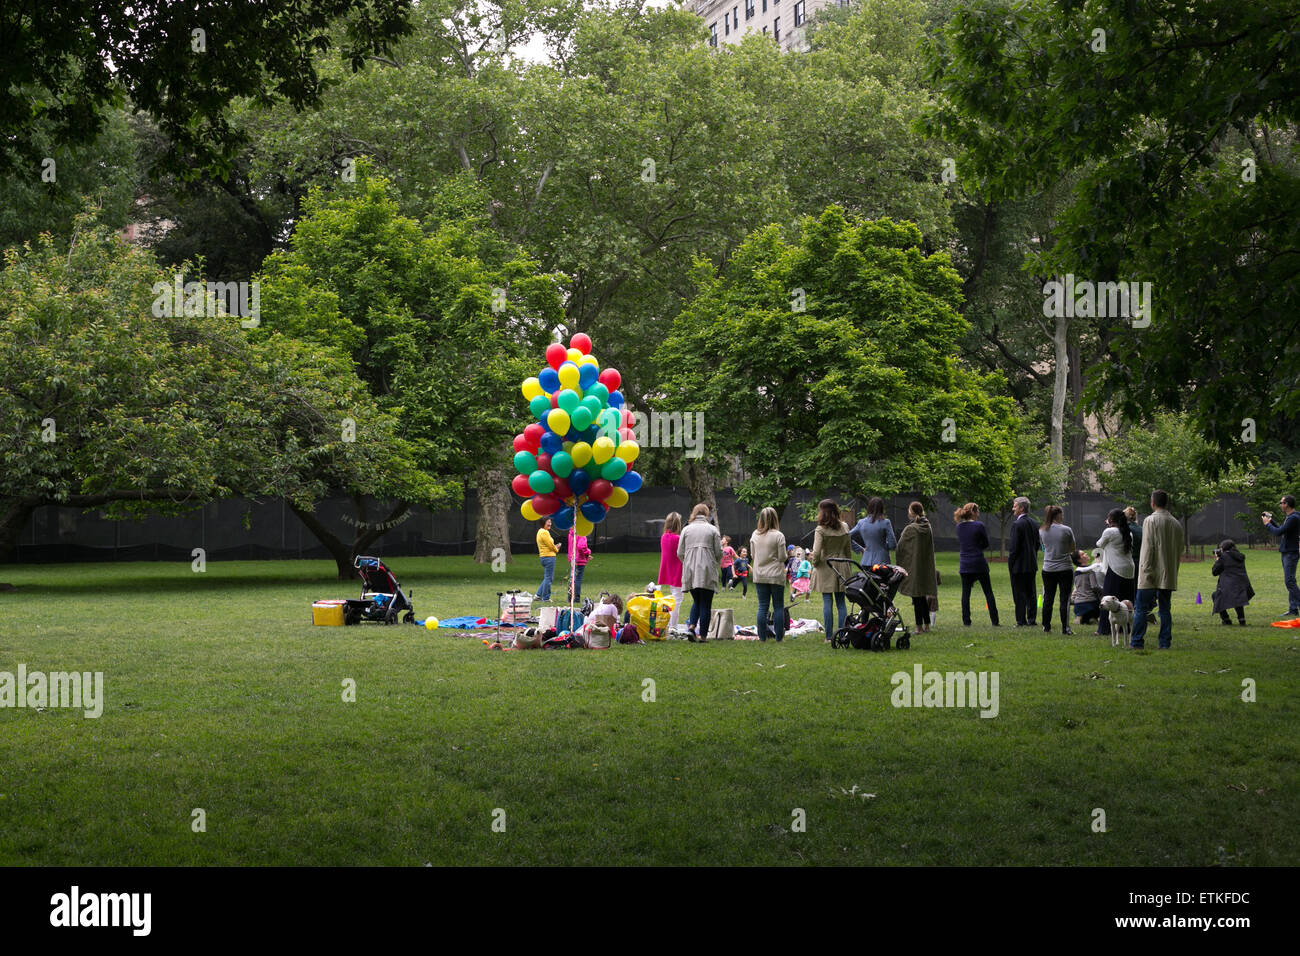 A party in Central Park, New York City. Stock Photo